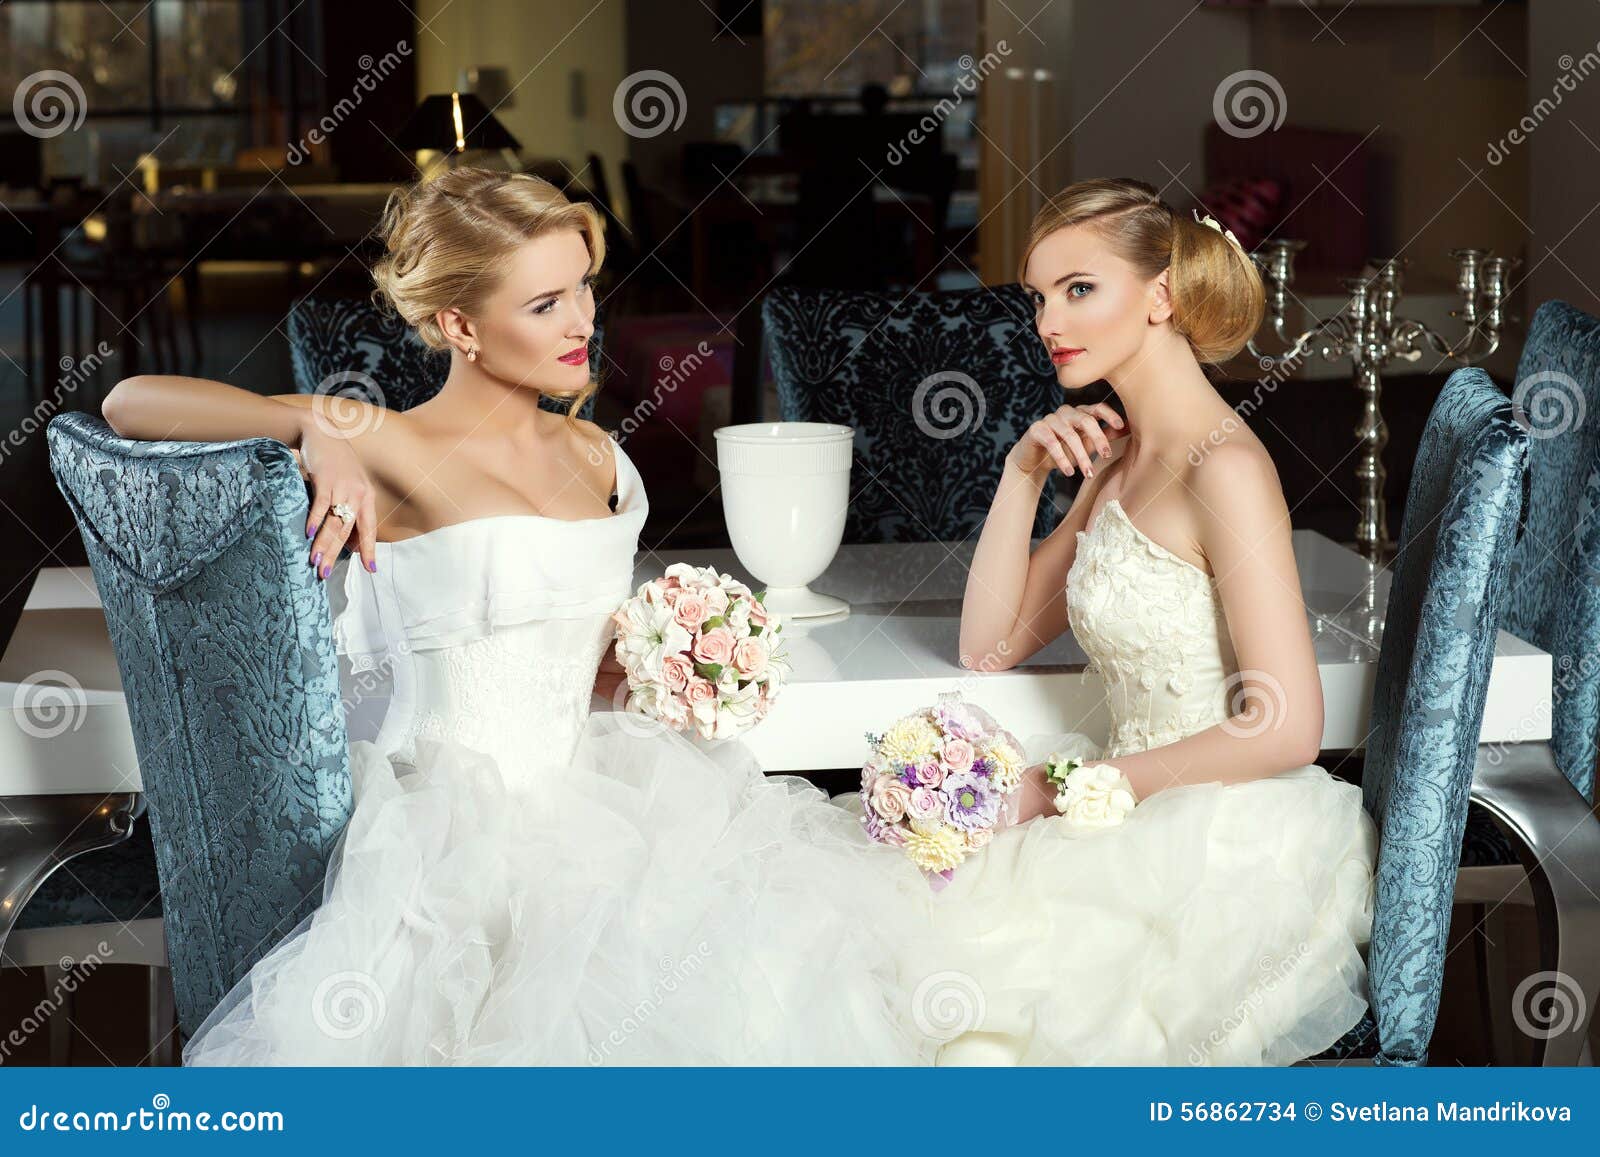 Gorgeous Bride Best Image & Photo (Free Trial)